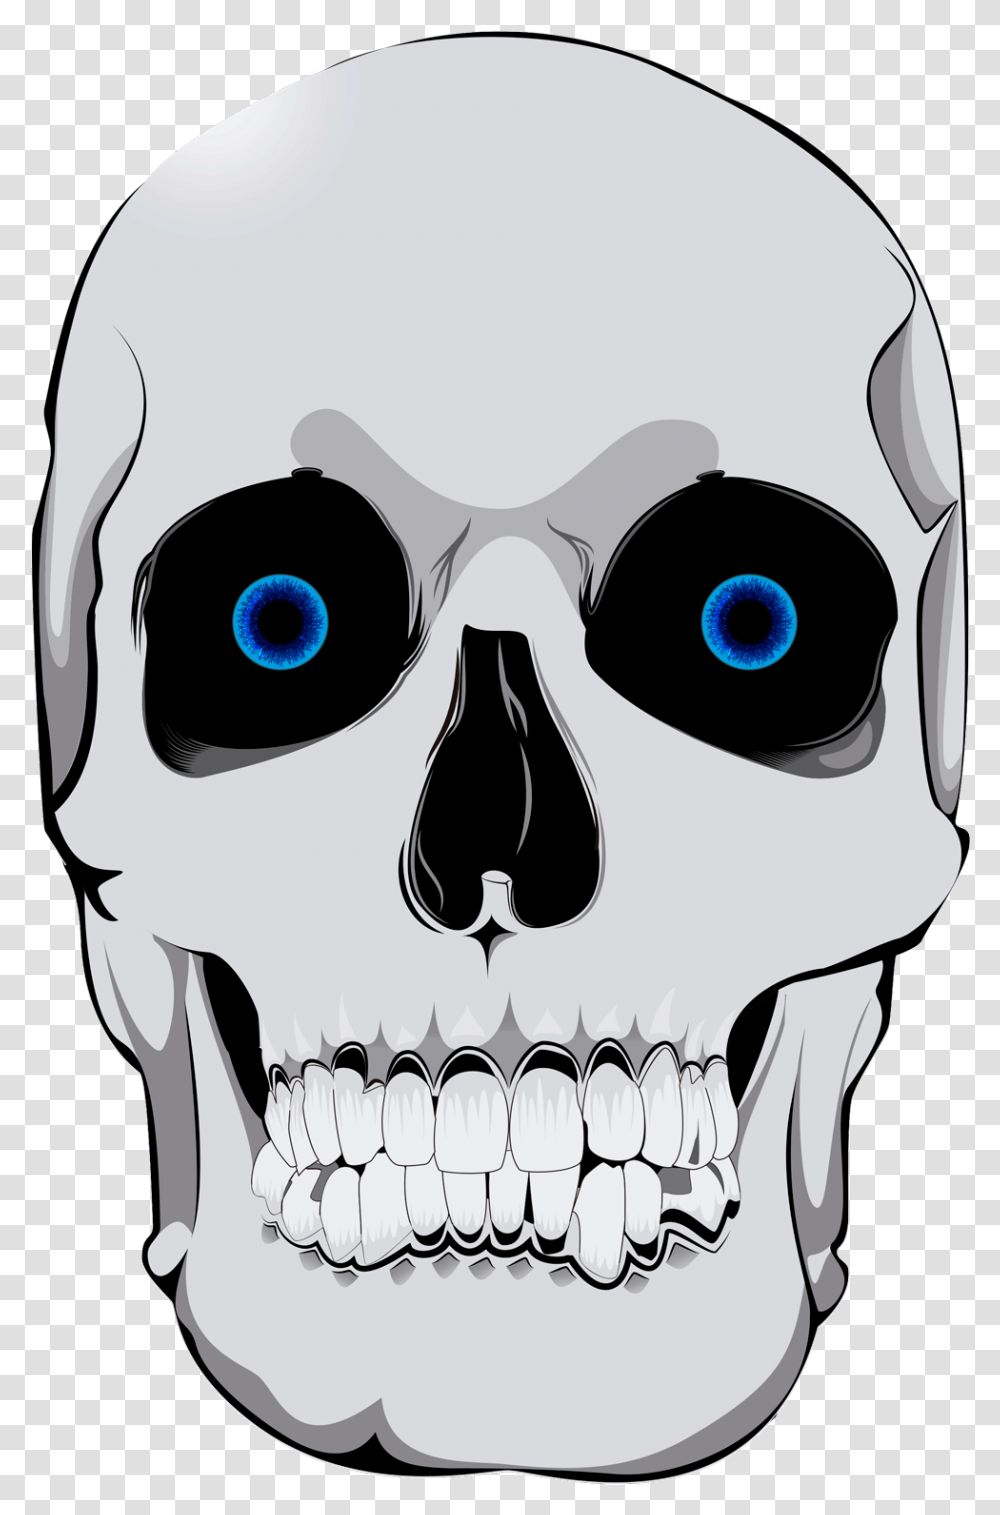 Amazing Cliparts Today1582519304 Gif Clipart Image Uhd Animated Skulls, Head, Pillow, Cushion, Teeth Transparent Png